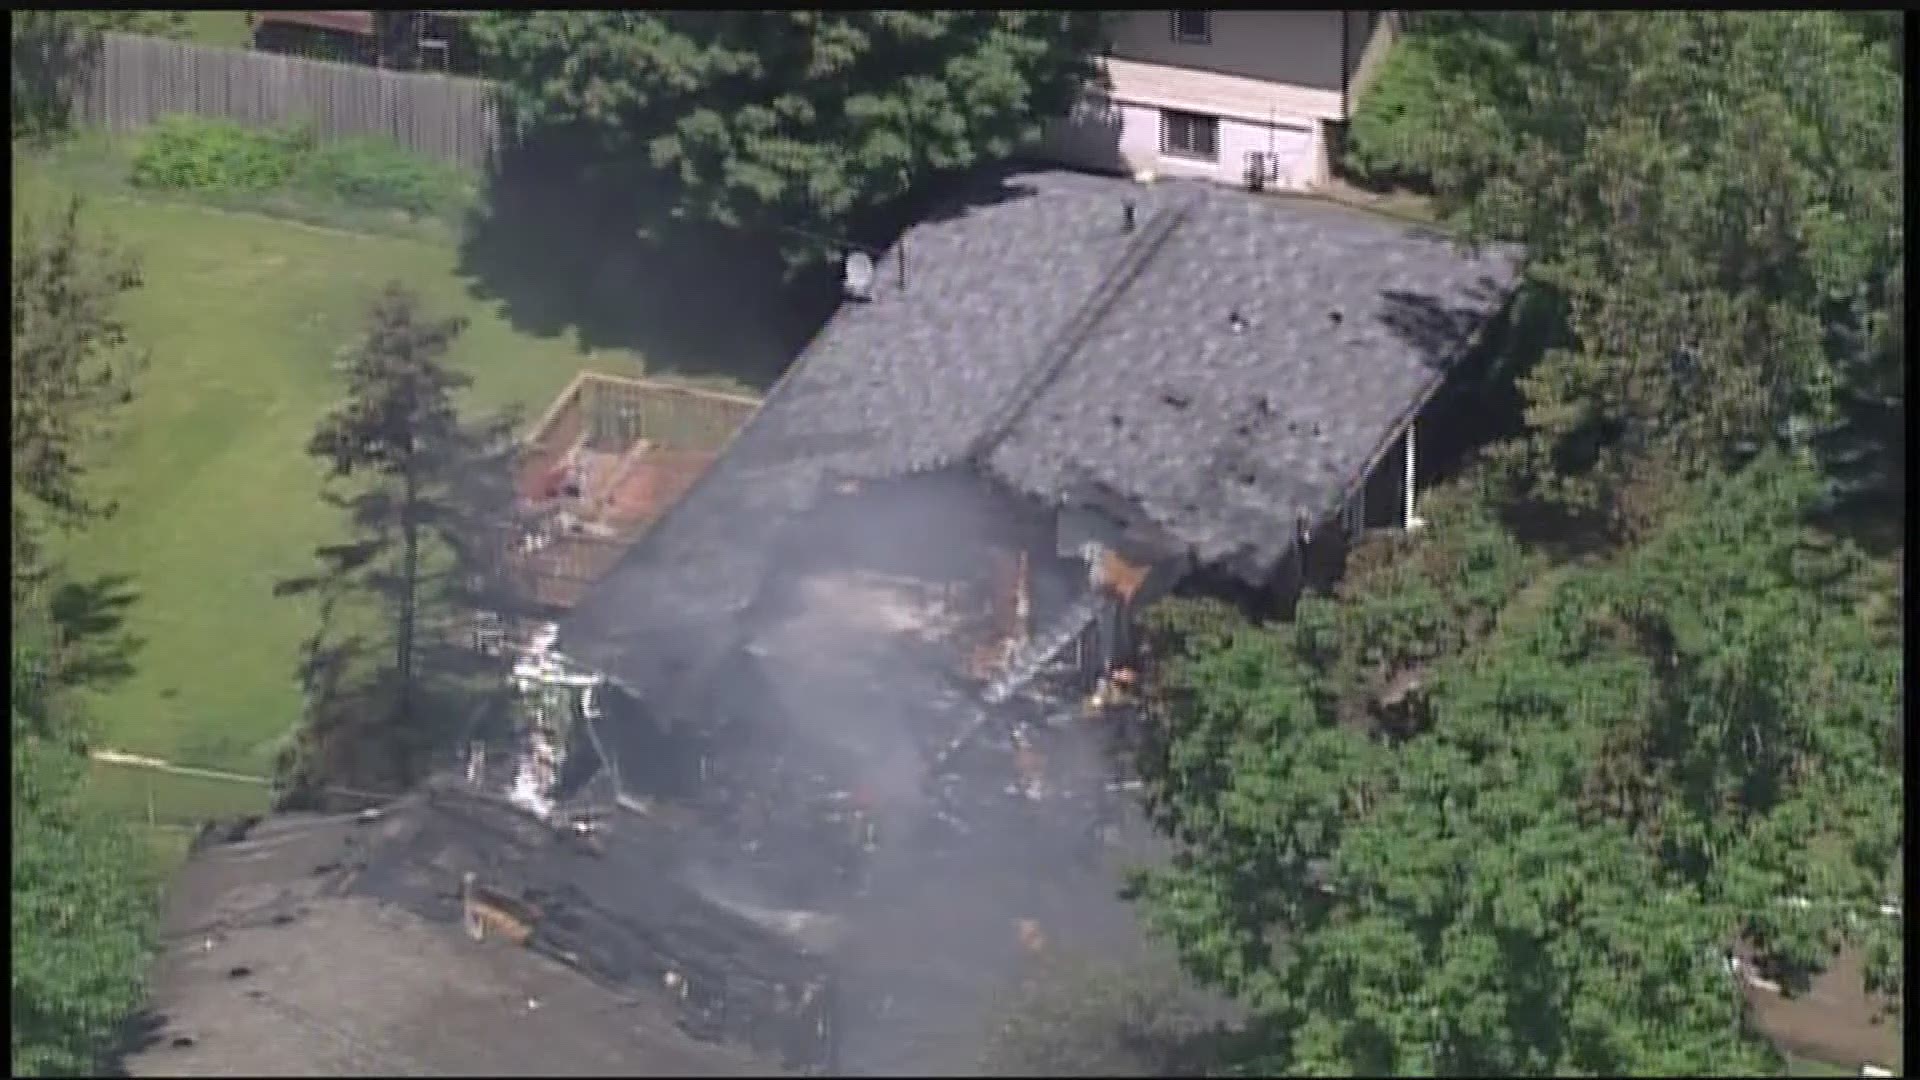 A reported explosion and the fire that followed caused significant damage to a pair of homes in New Hope Wednesday.